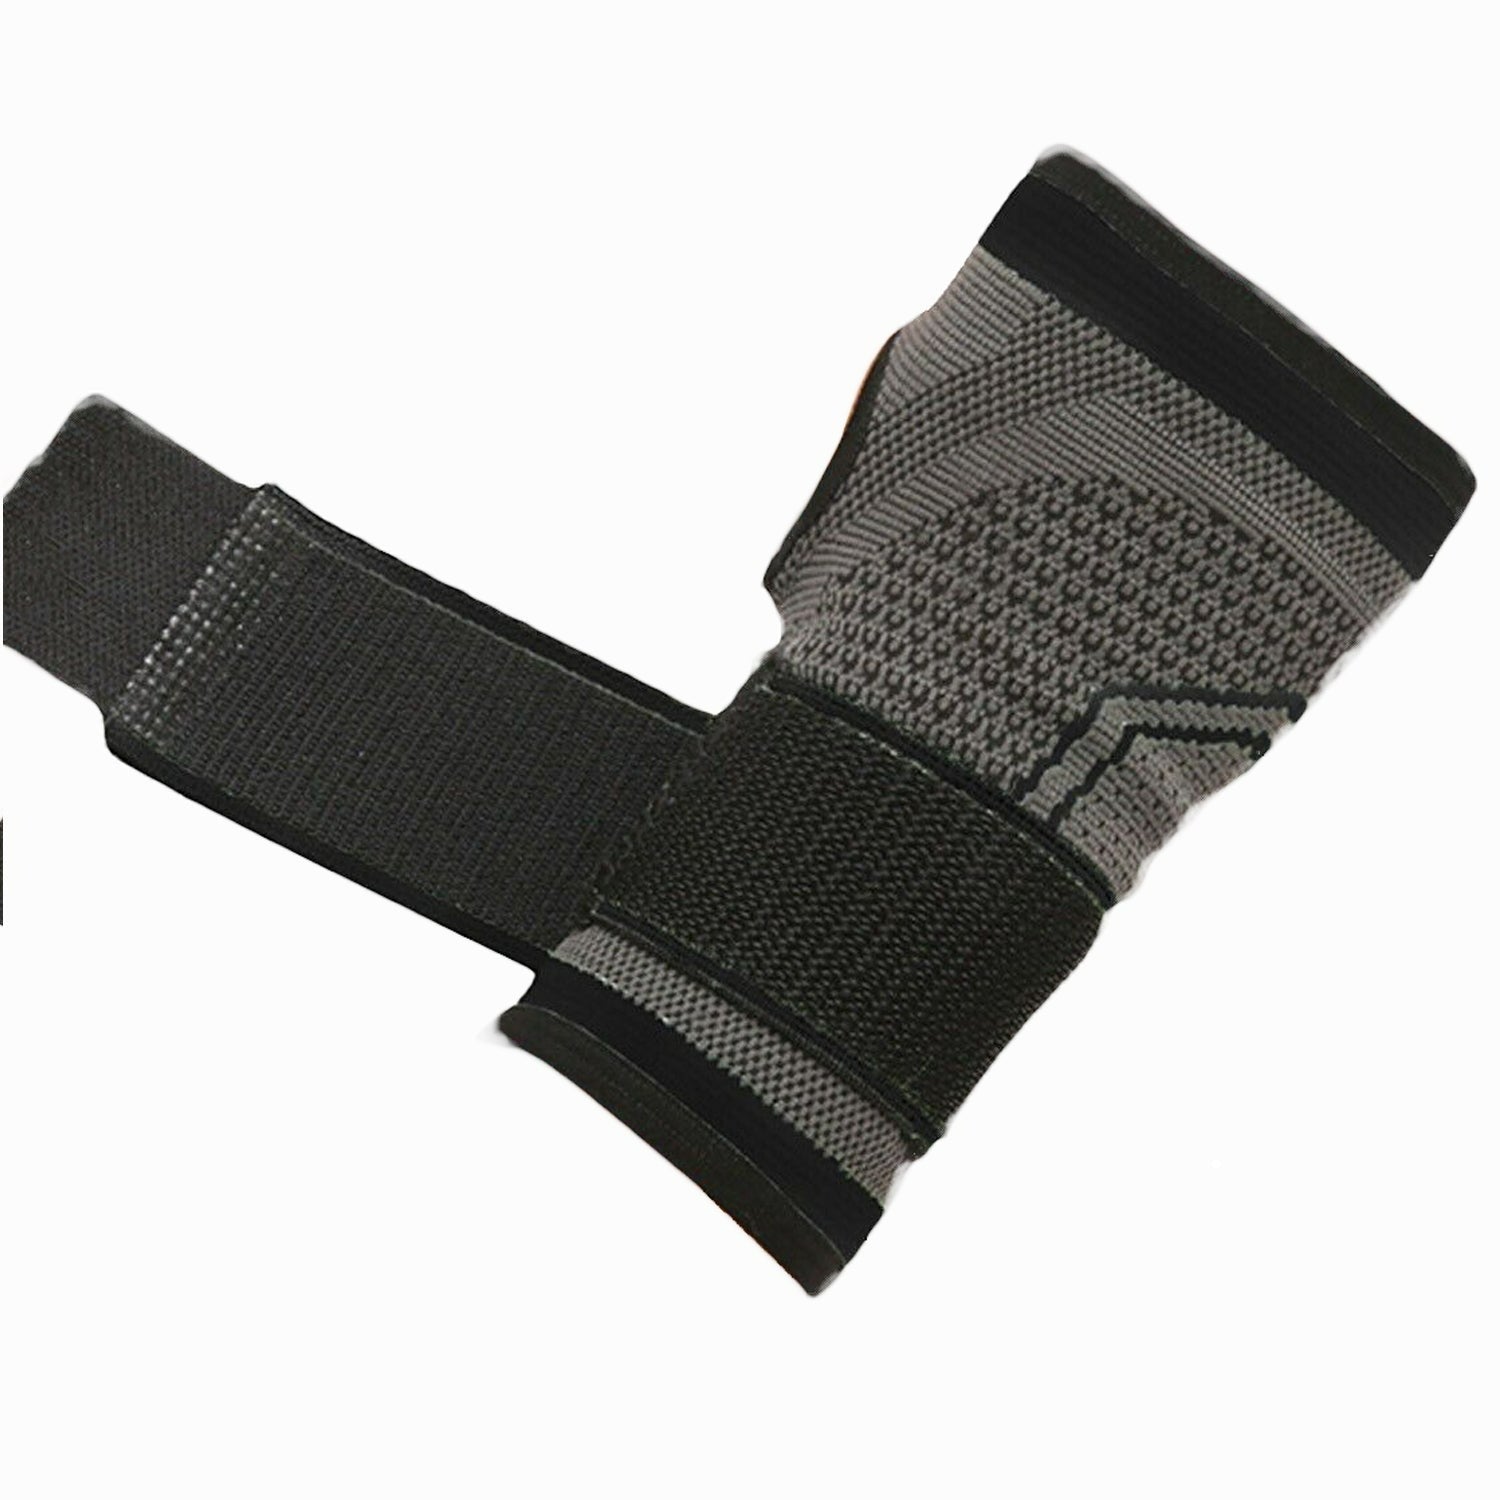 Wrist Support Compression Hand Brace Wrap Strap Thumb Protector Carpal Tunnel